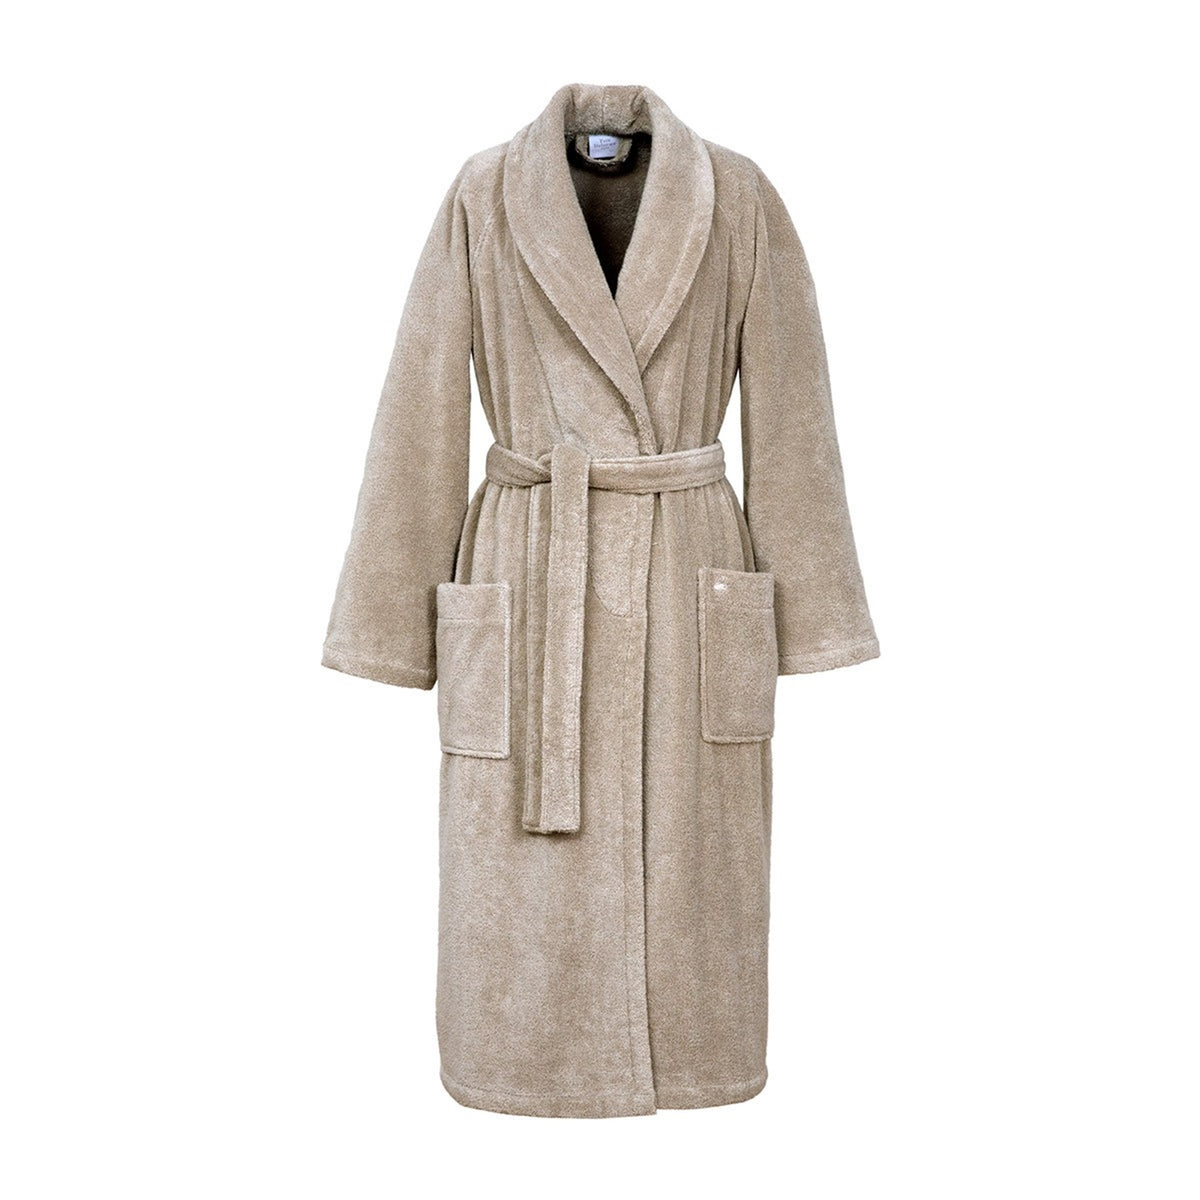 Front View of Yves Delorme Etoile Bath Robe in Color Pierre